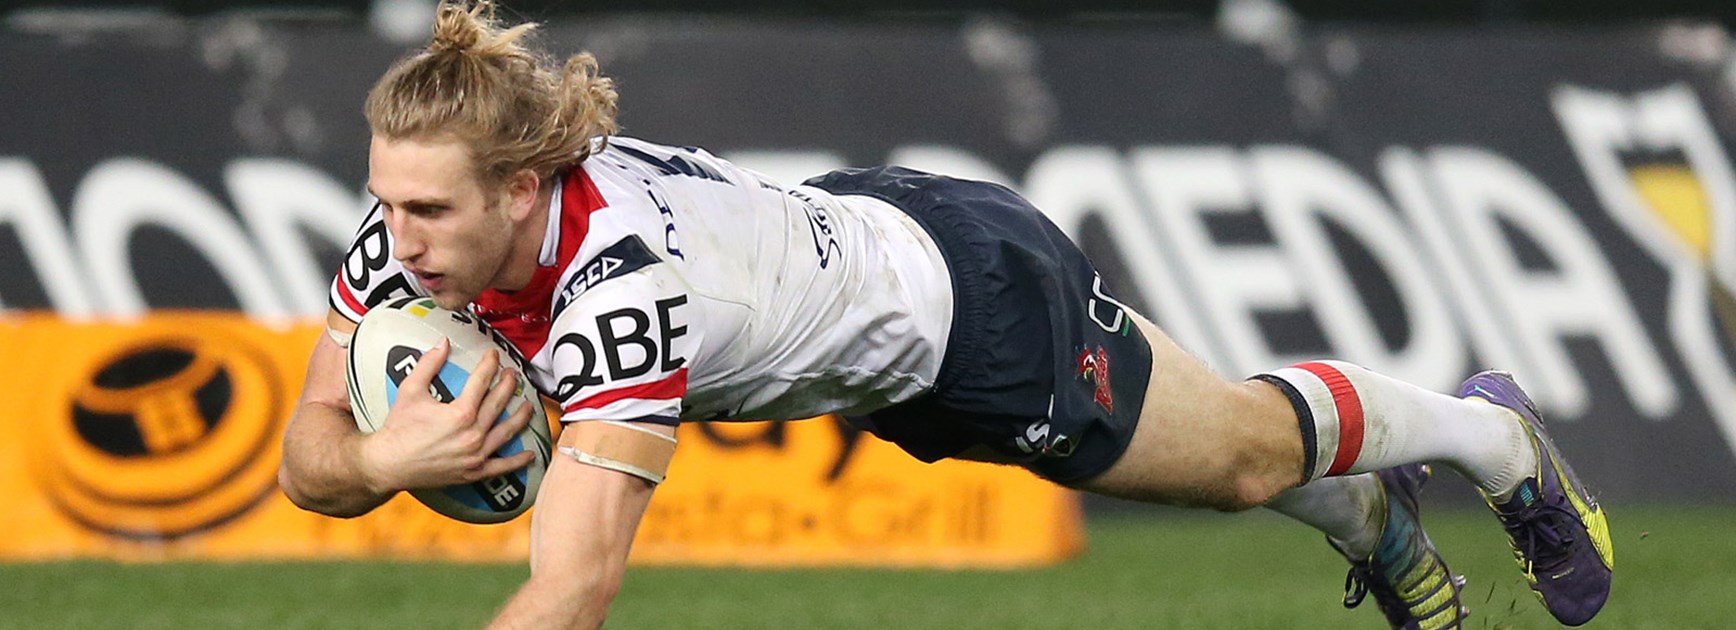 Roosters winger Brendan Elliot continues to impress early in his first grade career.